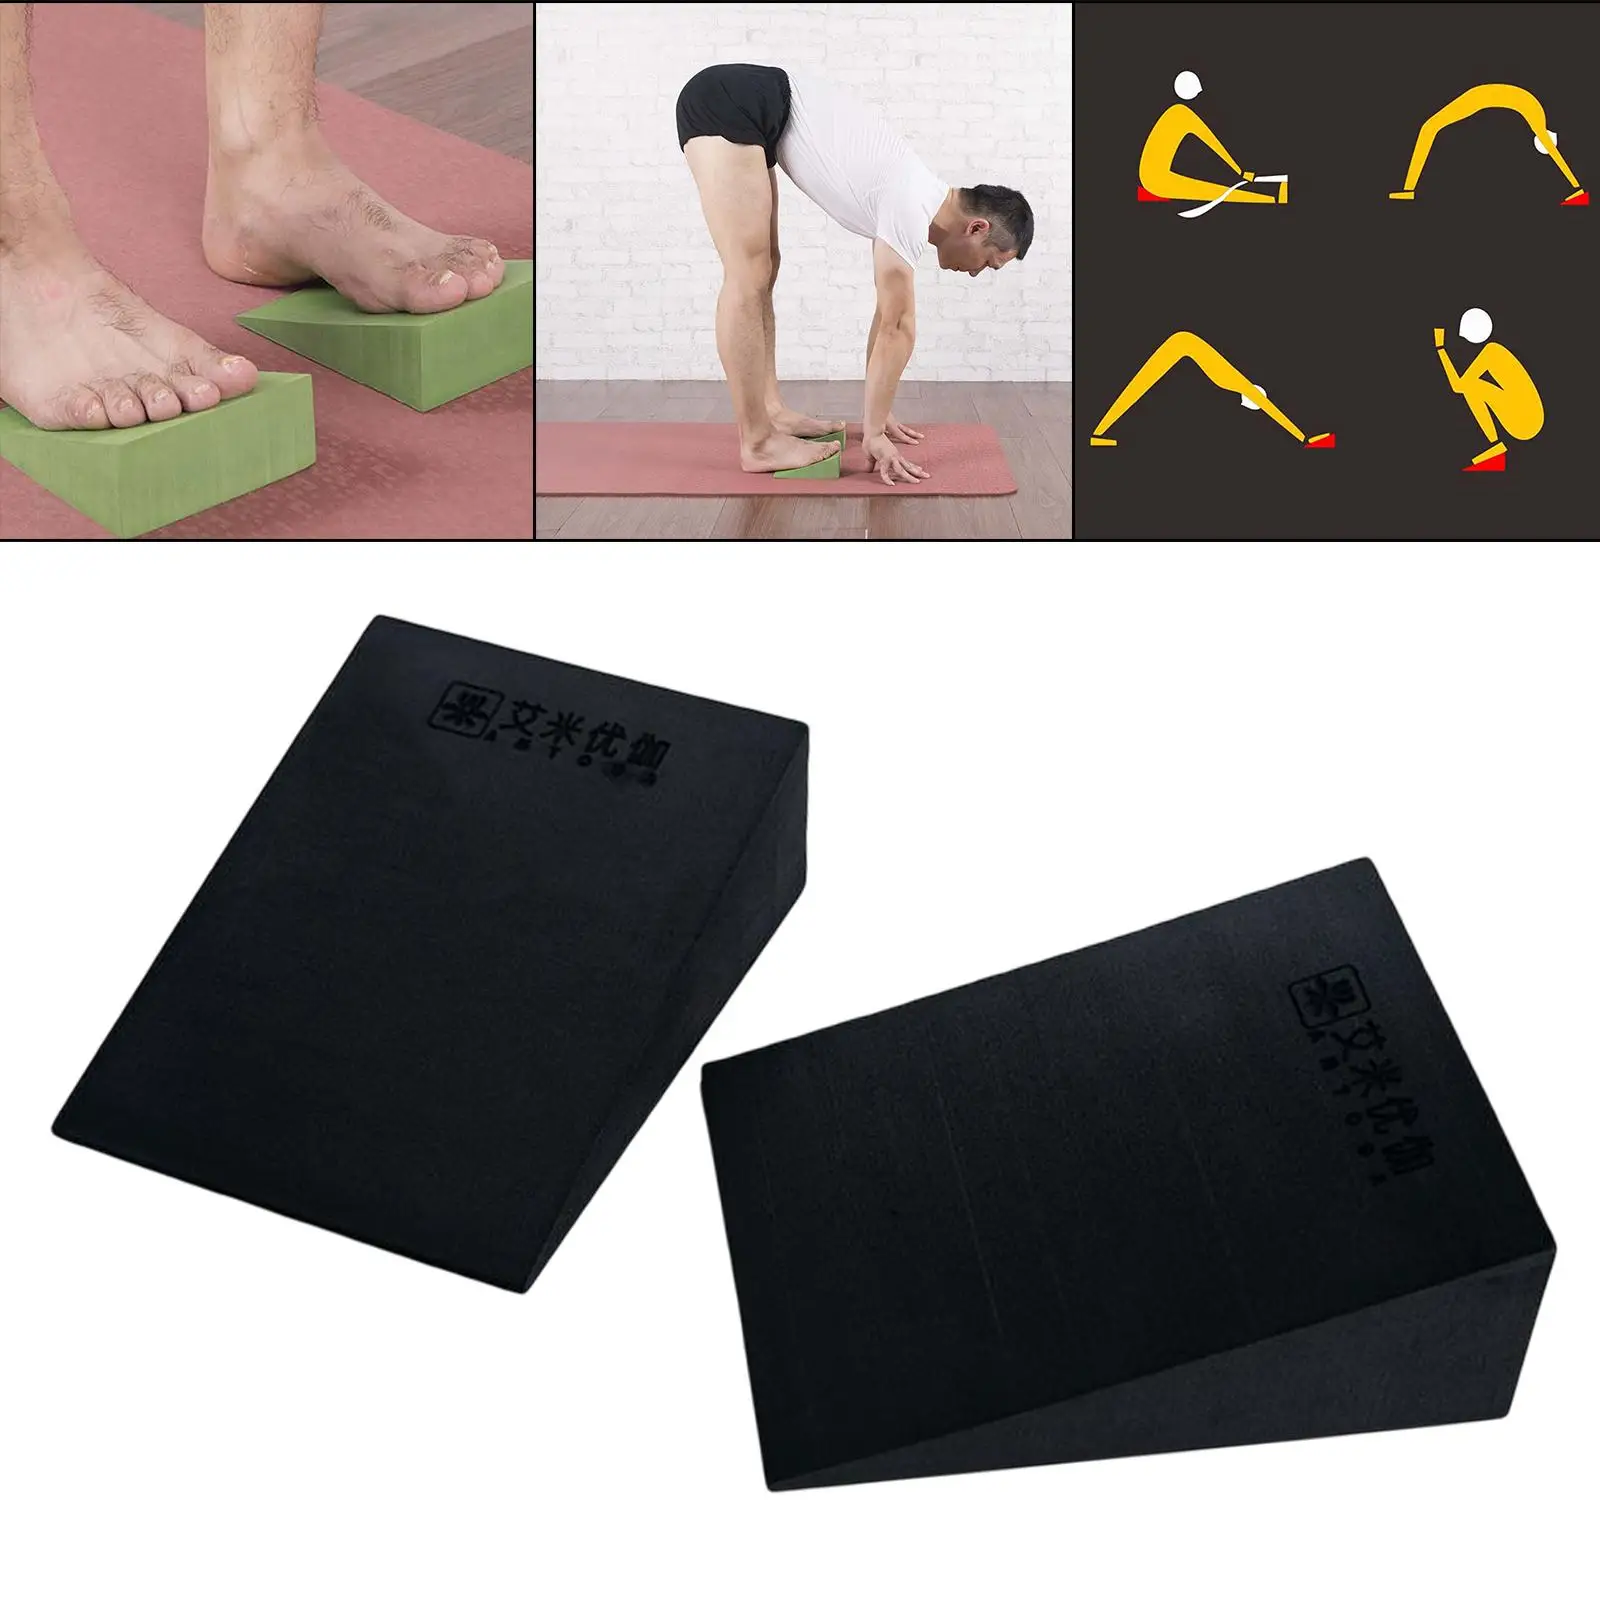 Yoga Blocks Knee Pad Accs Wrist Wedge Squat Wedge Exercise for Stretching